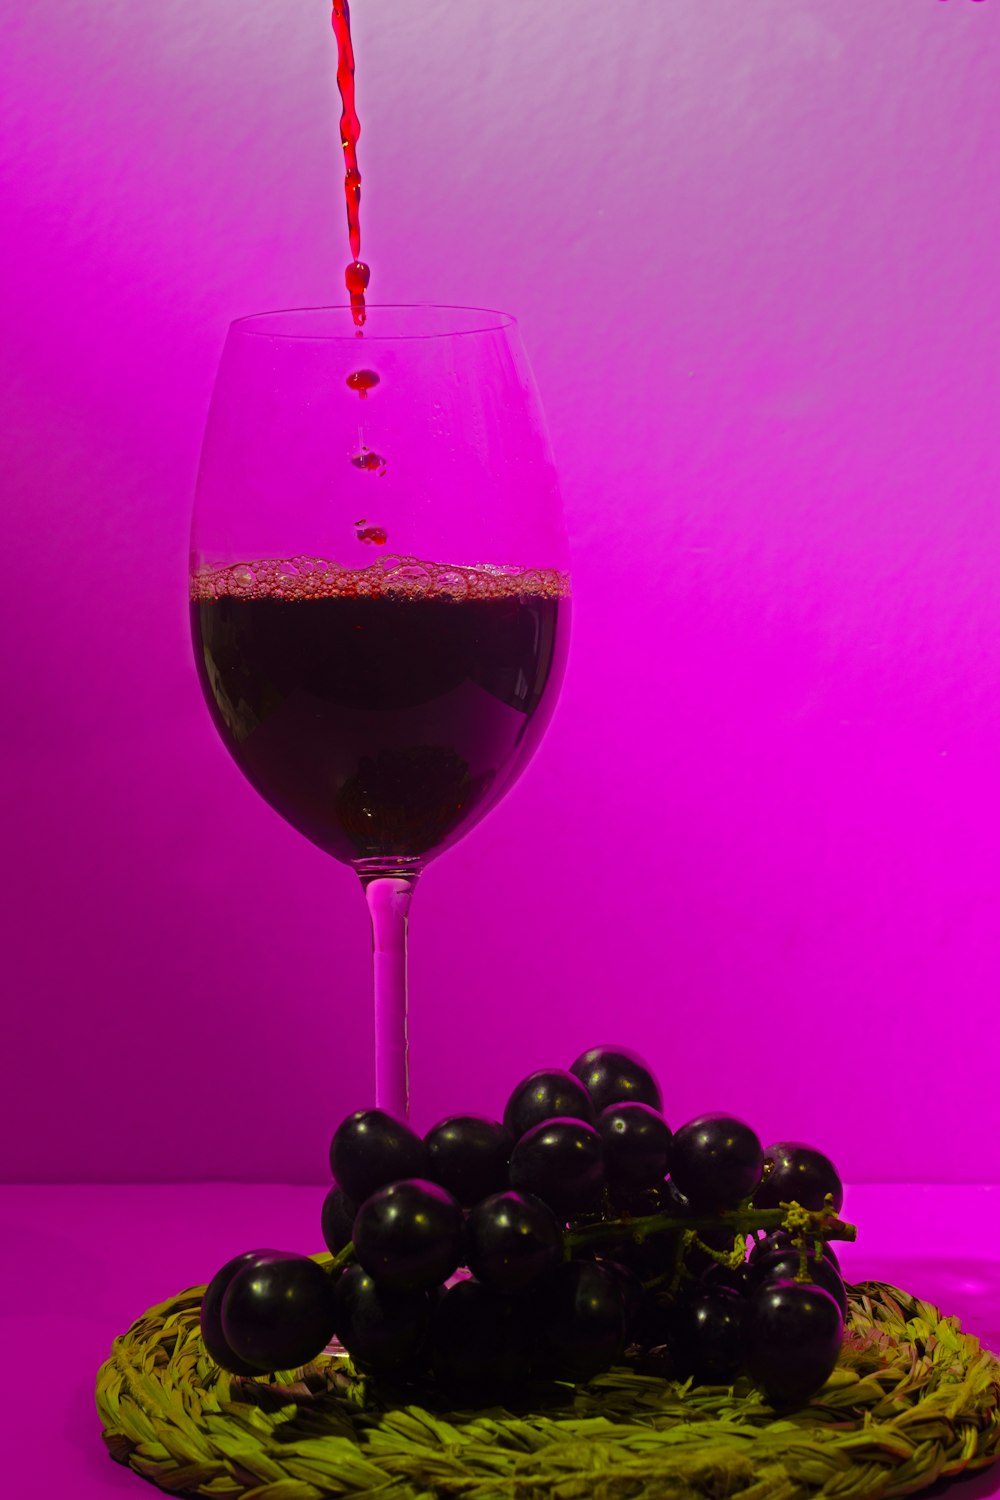 a glass of red wine being poured into a glass